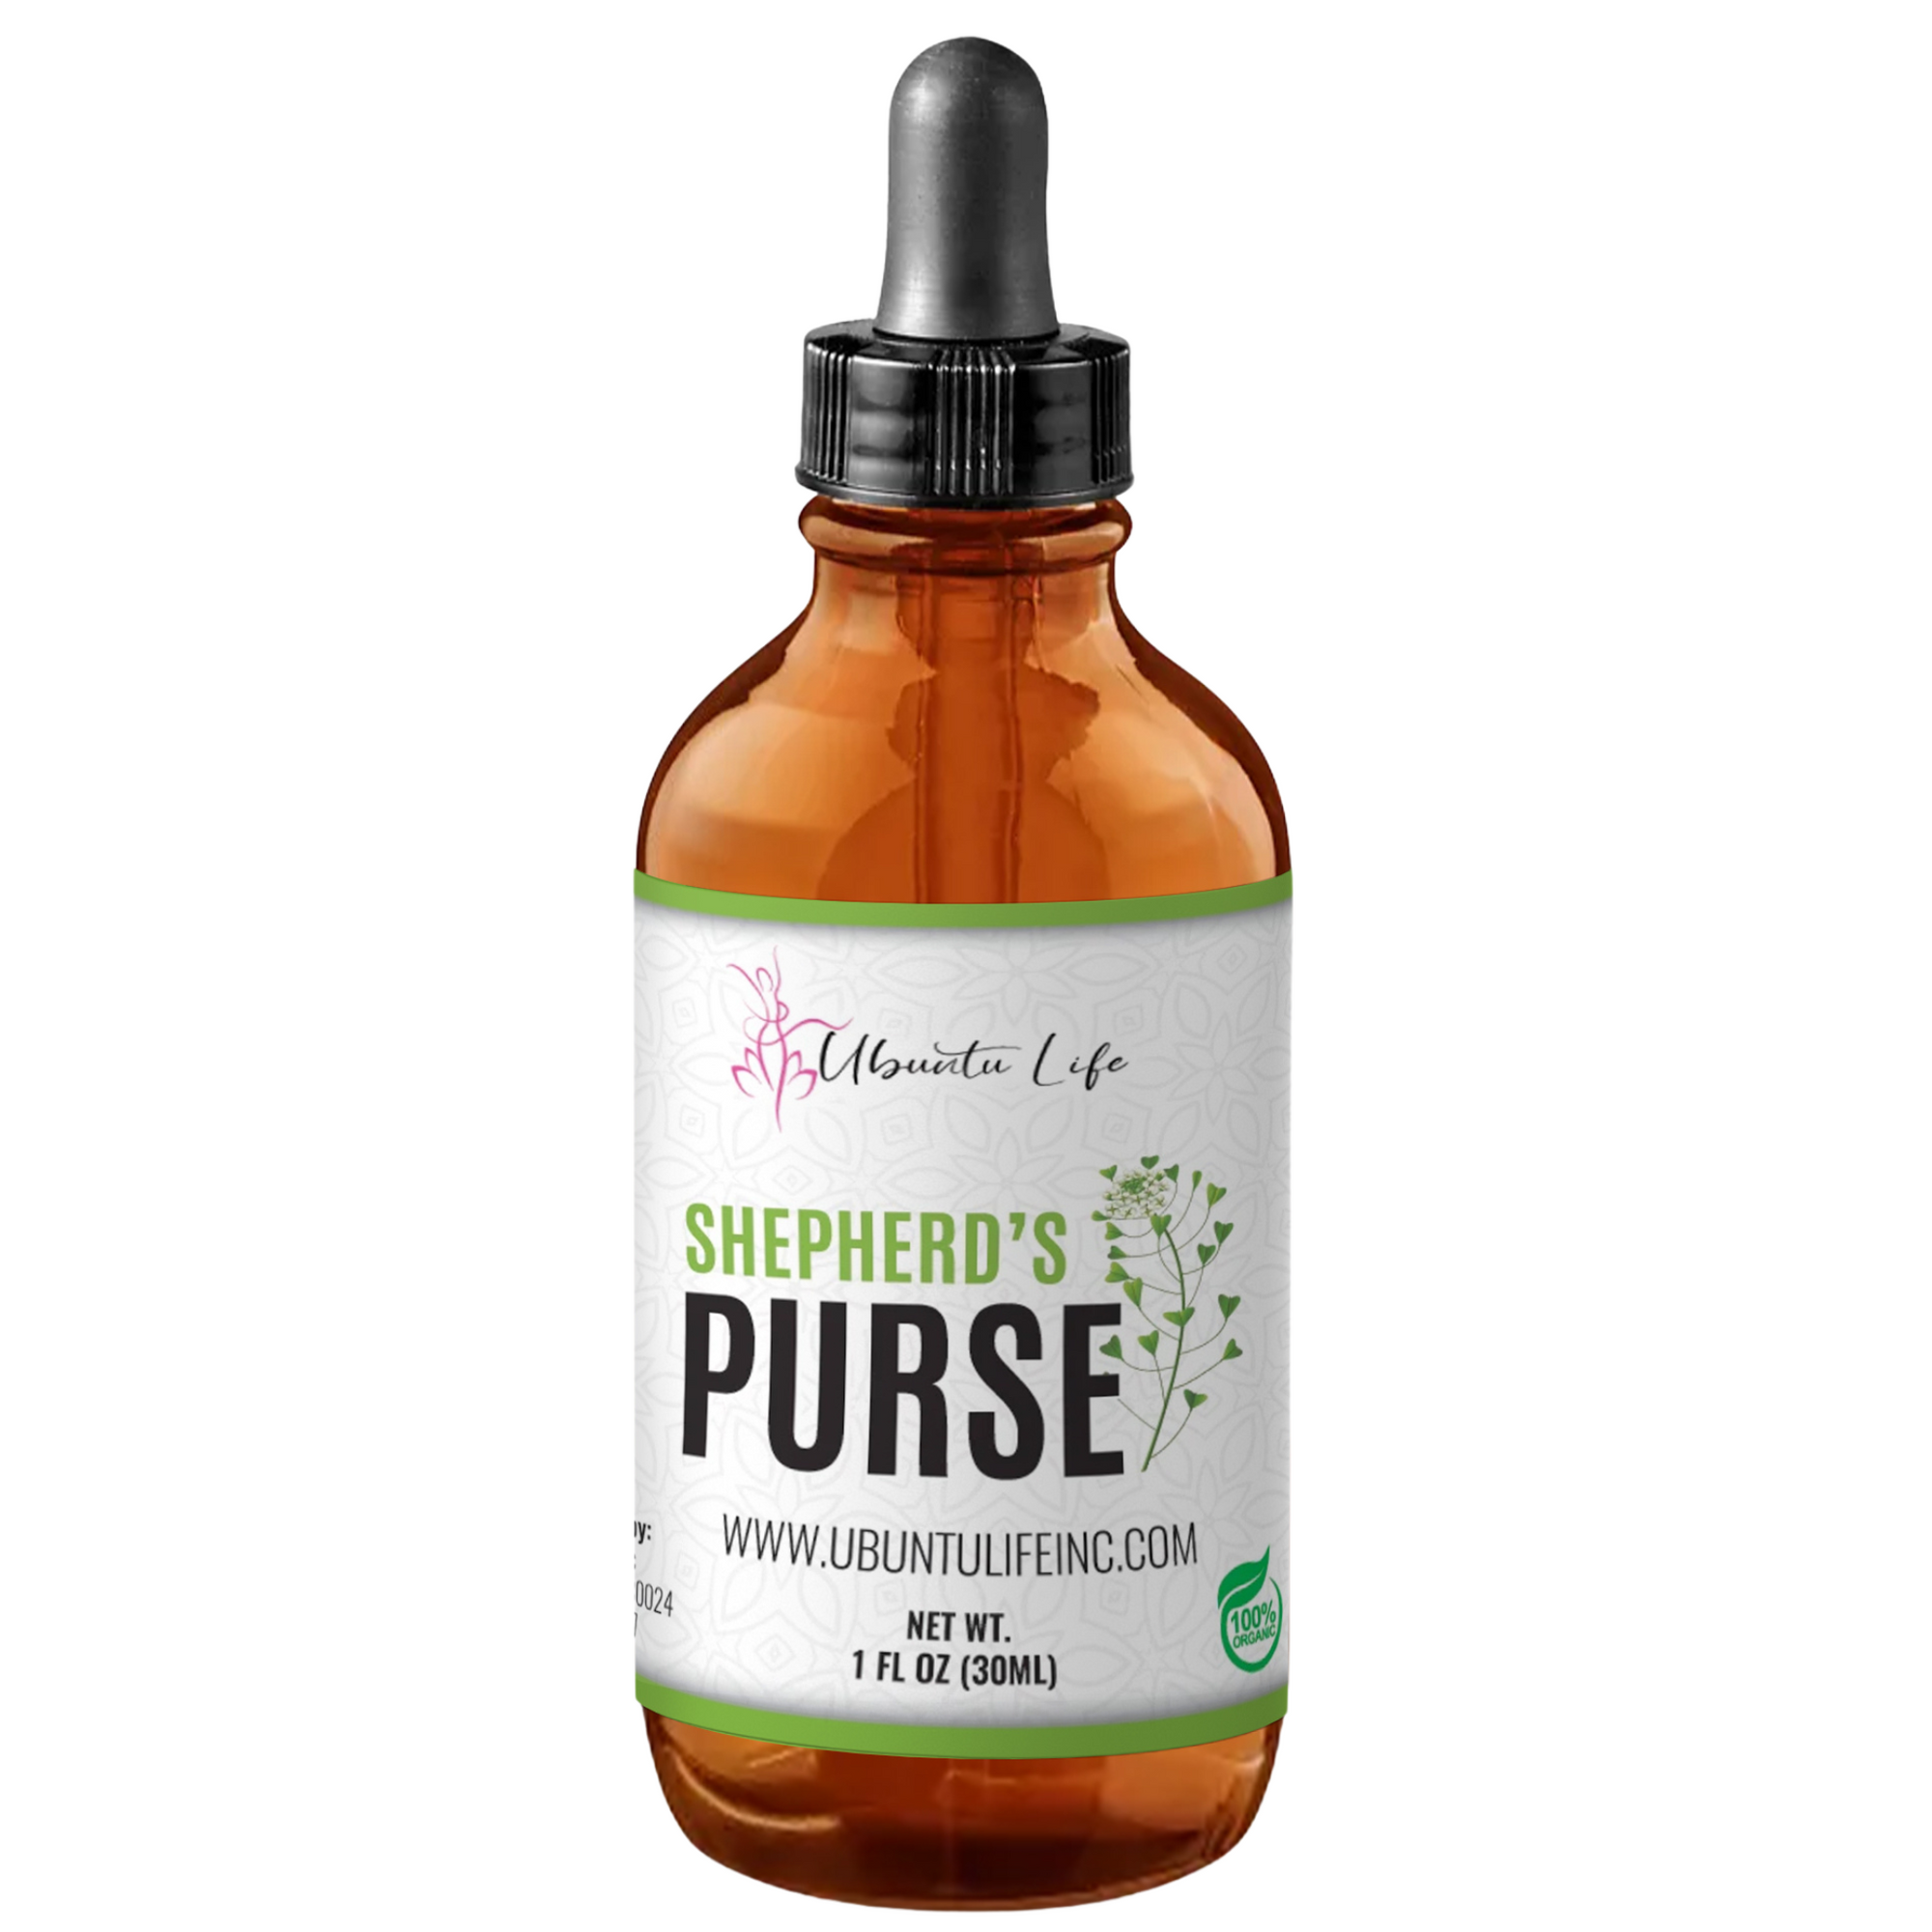 Shepherd's Purse - Your Natural Solution for Menstrual Relief